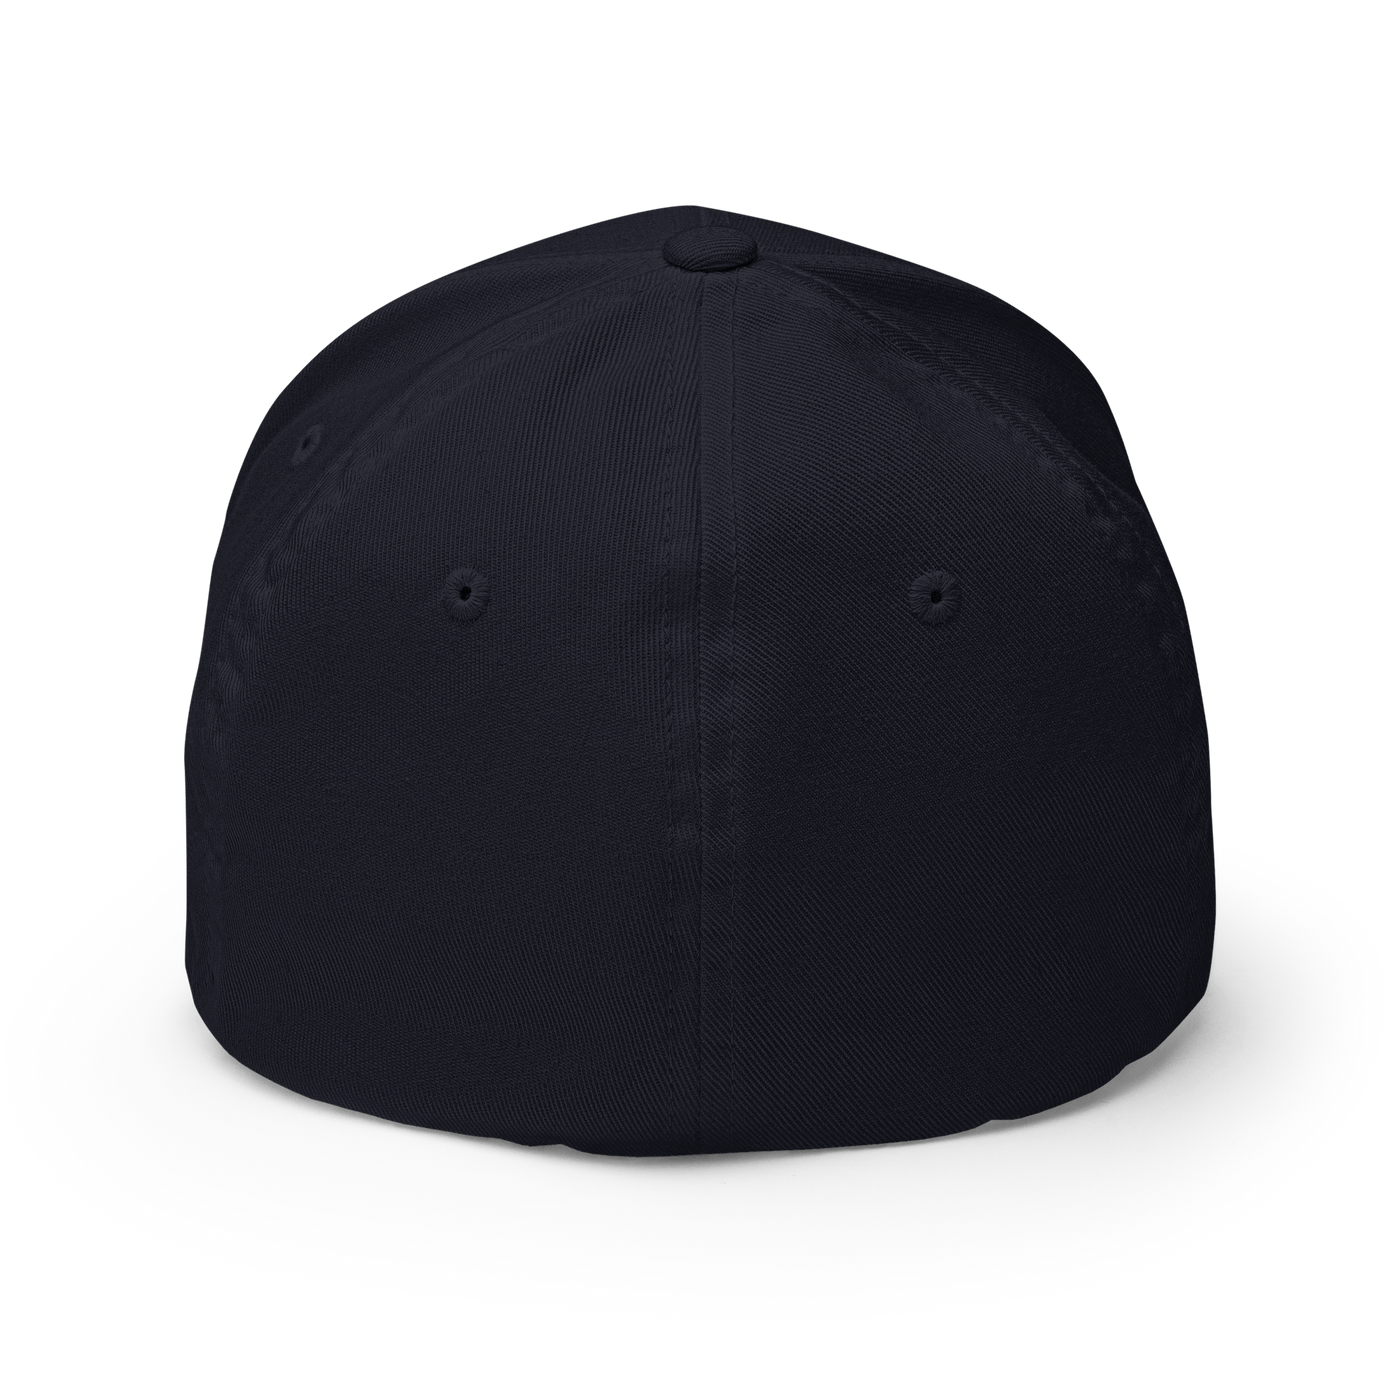 Take me to rave Flexfit Cap - Olive - S/M - Just Another Cap Store